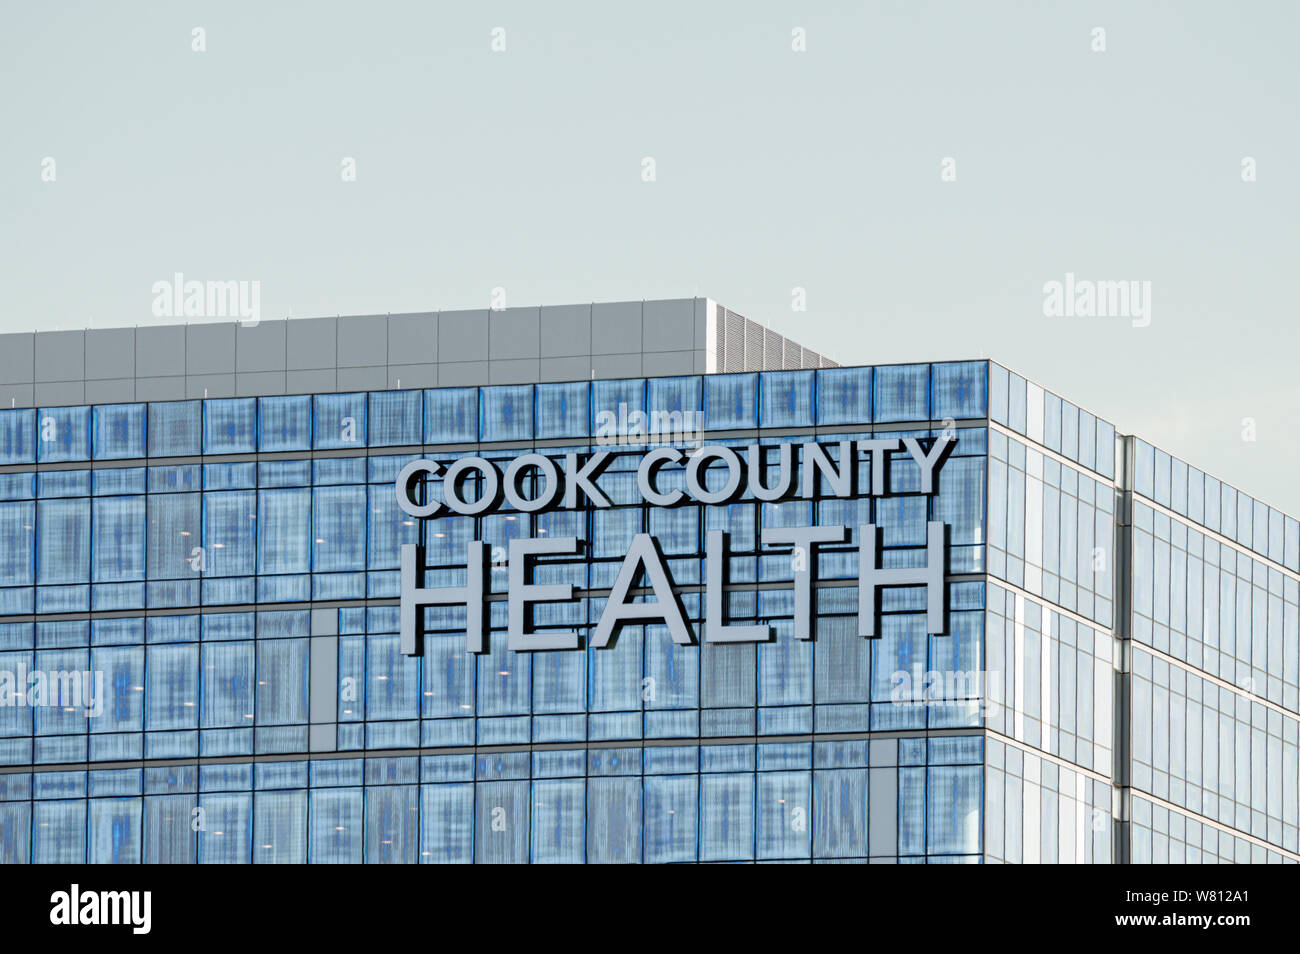 Chicago, Illinois-August 1, 2019: Exterior sign on building at Cook County Health Hospital, public health department. Stock Photo